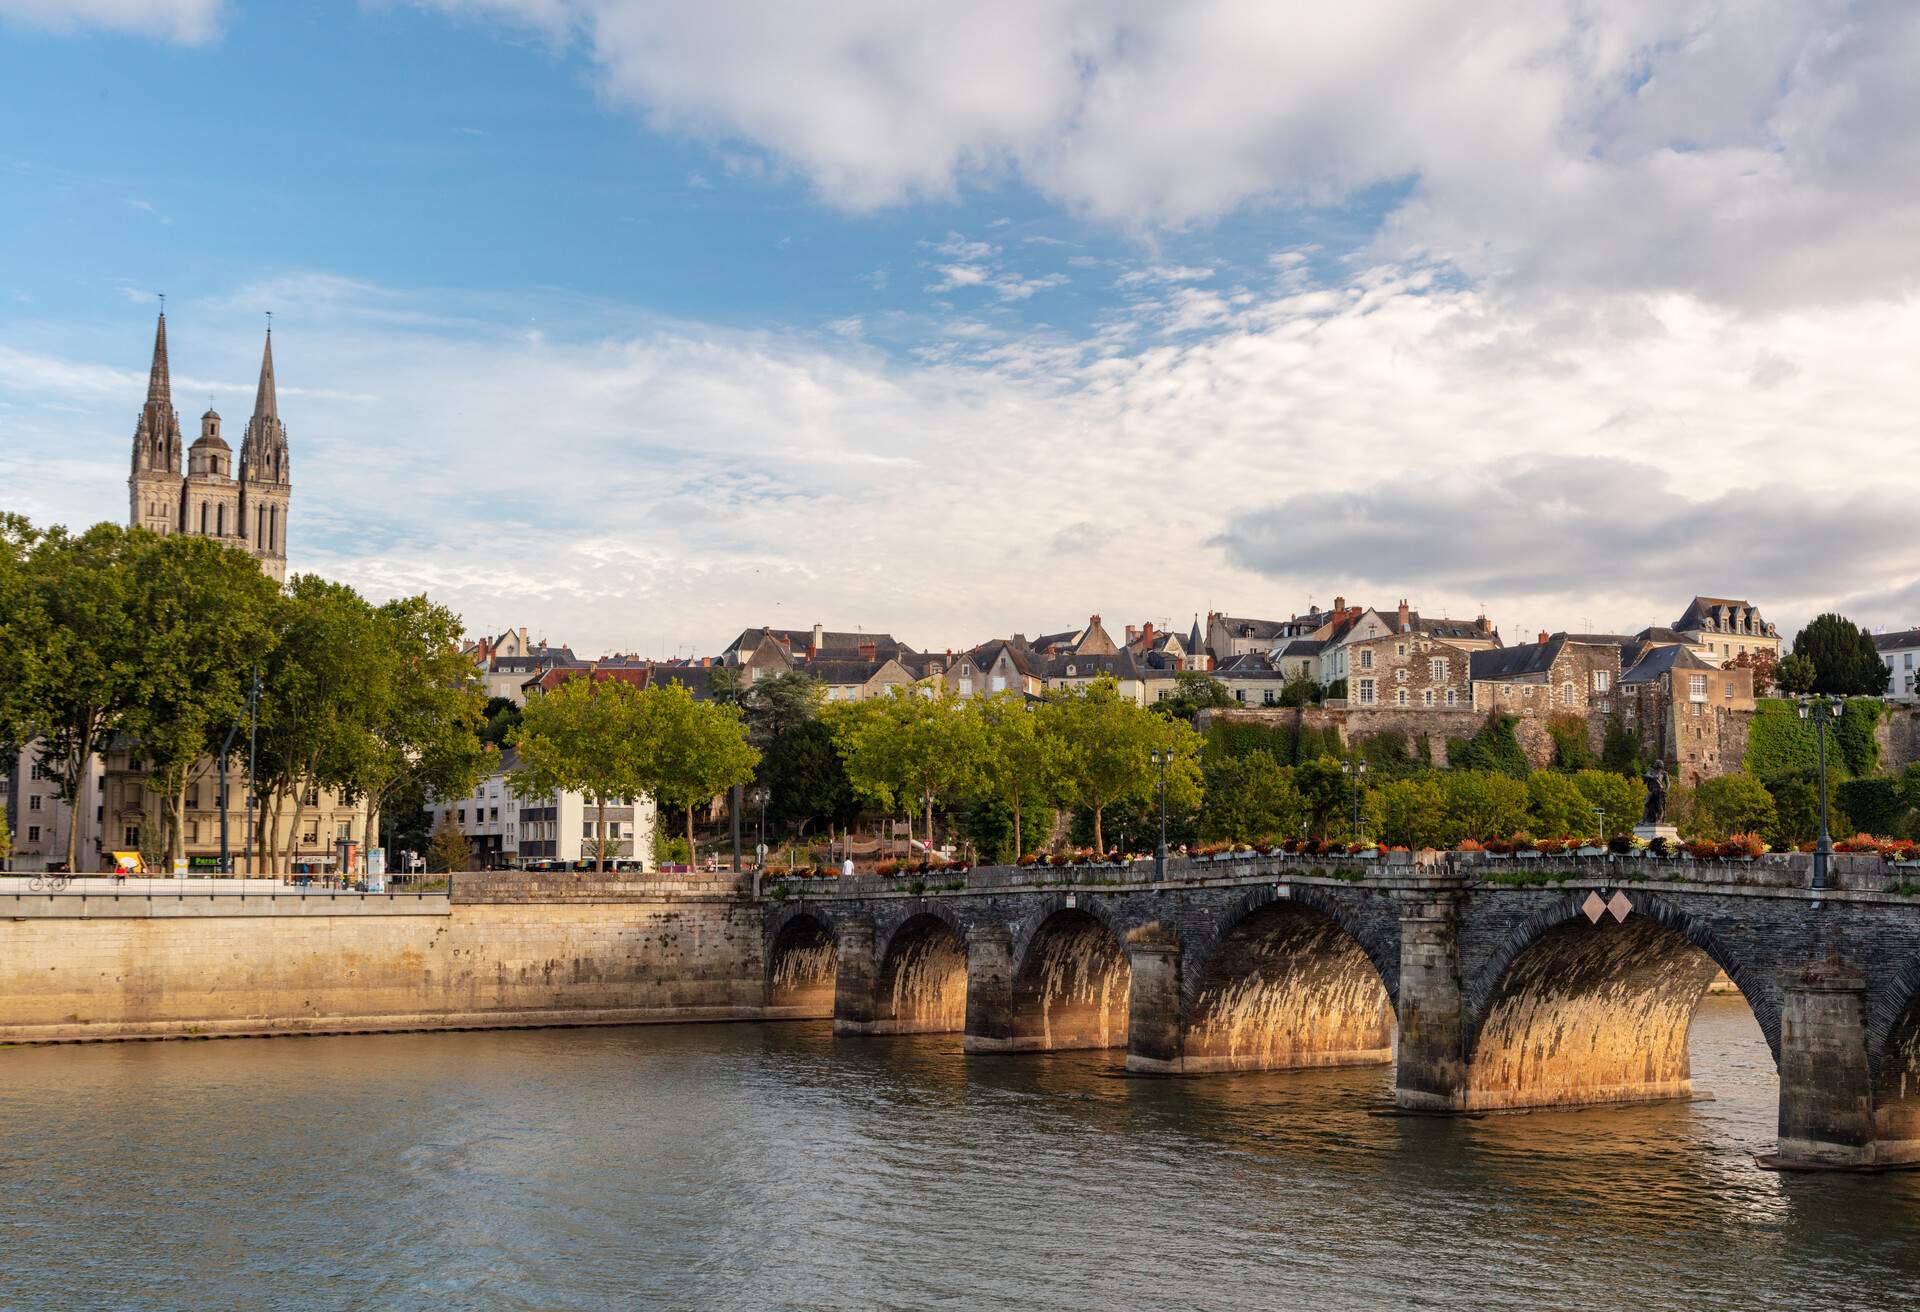 The Pont de Verdun crossing the Maine River leading into the historic city centre of Angers, France.